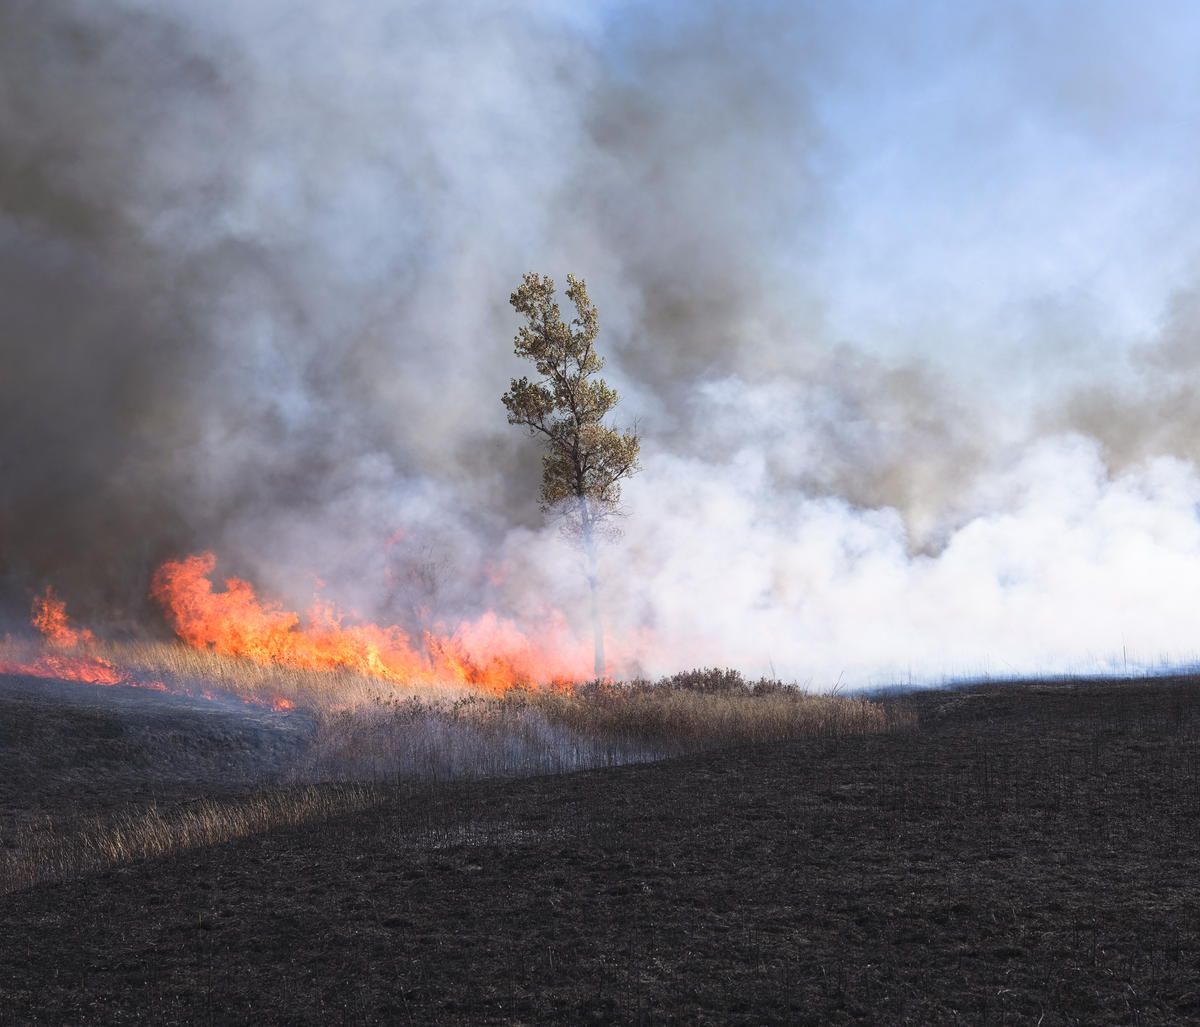 Fire burns through grasses, most of which will grow back quickly. But without regular fire, trees and shrubs can overtake the landscape. Image by Kyler Zeleny / For Harvest Public Media. United States, 2020.